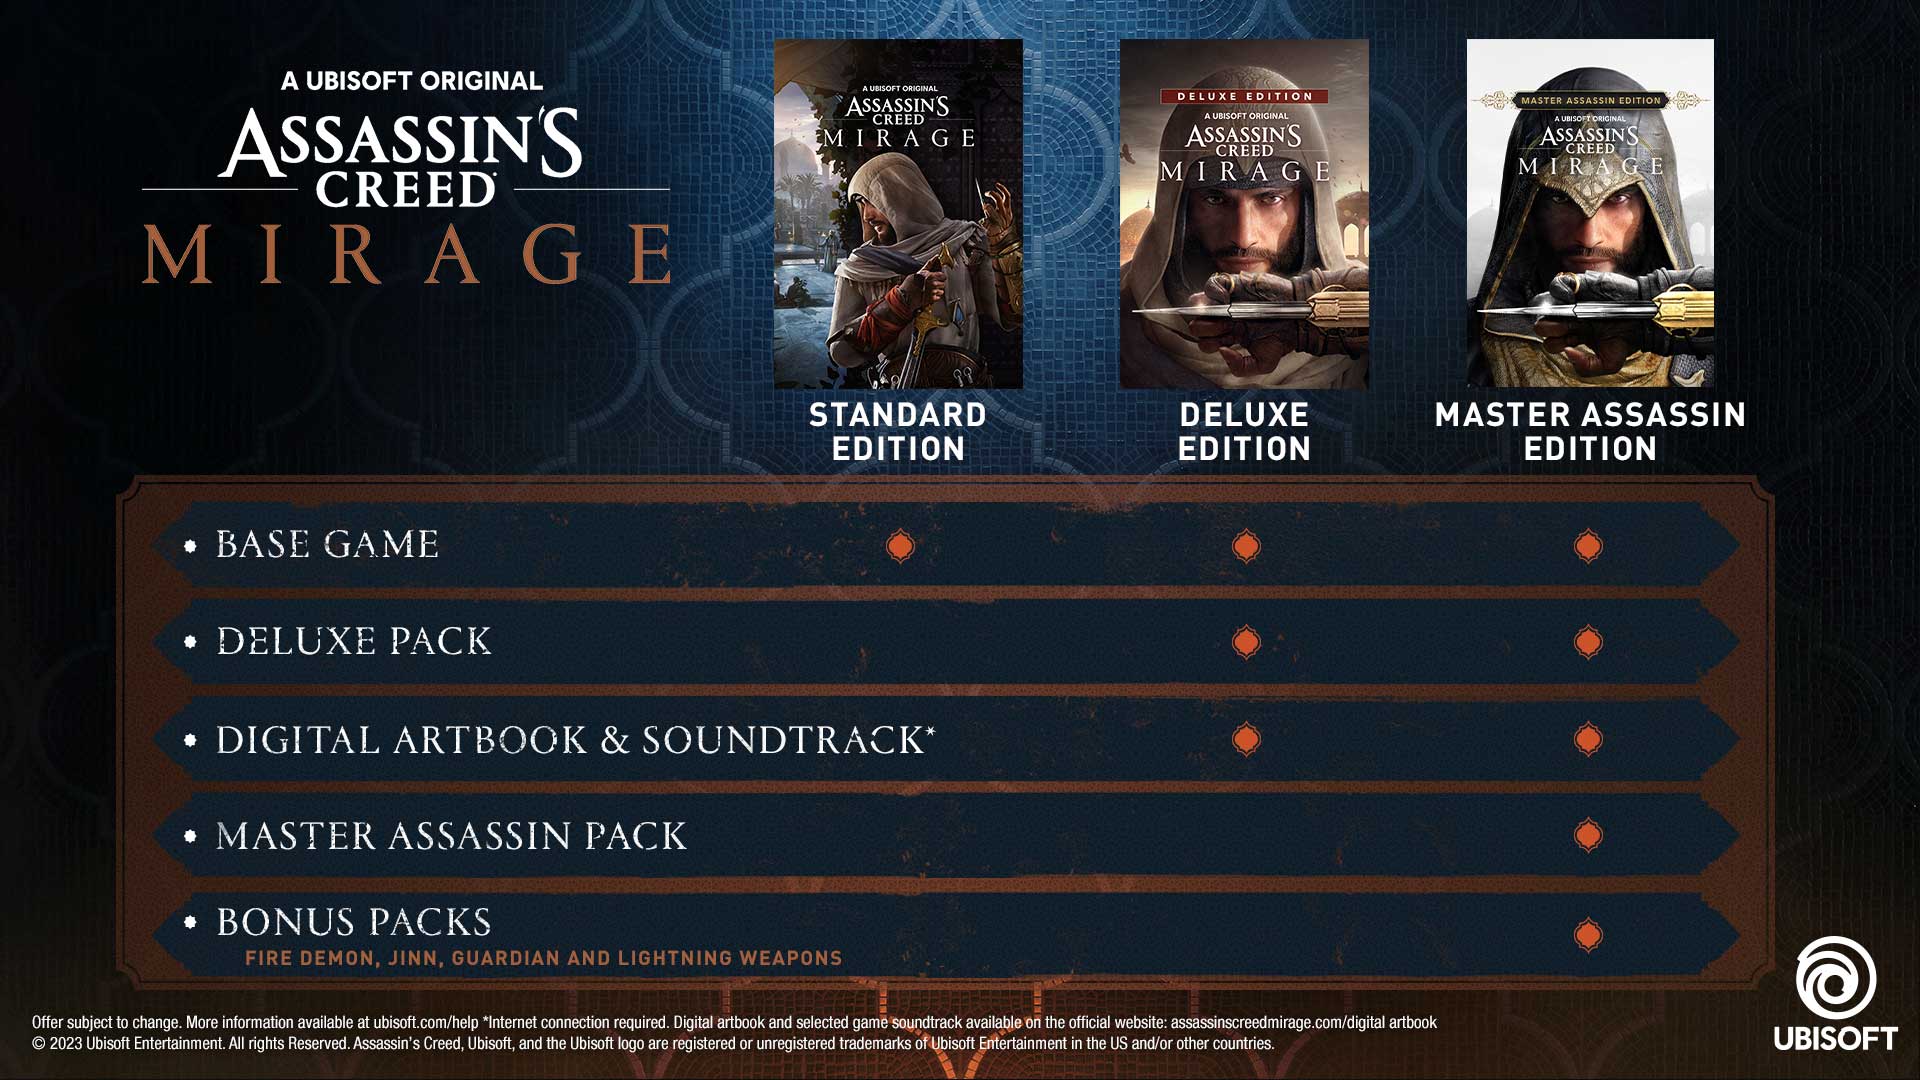 Contents of Assassin's Creed Mirage editions